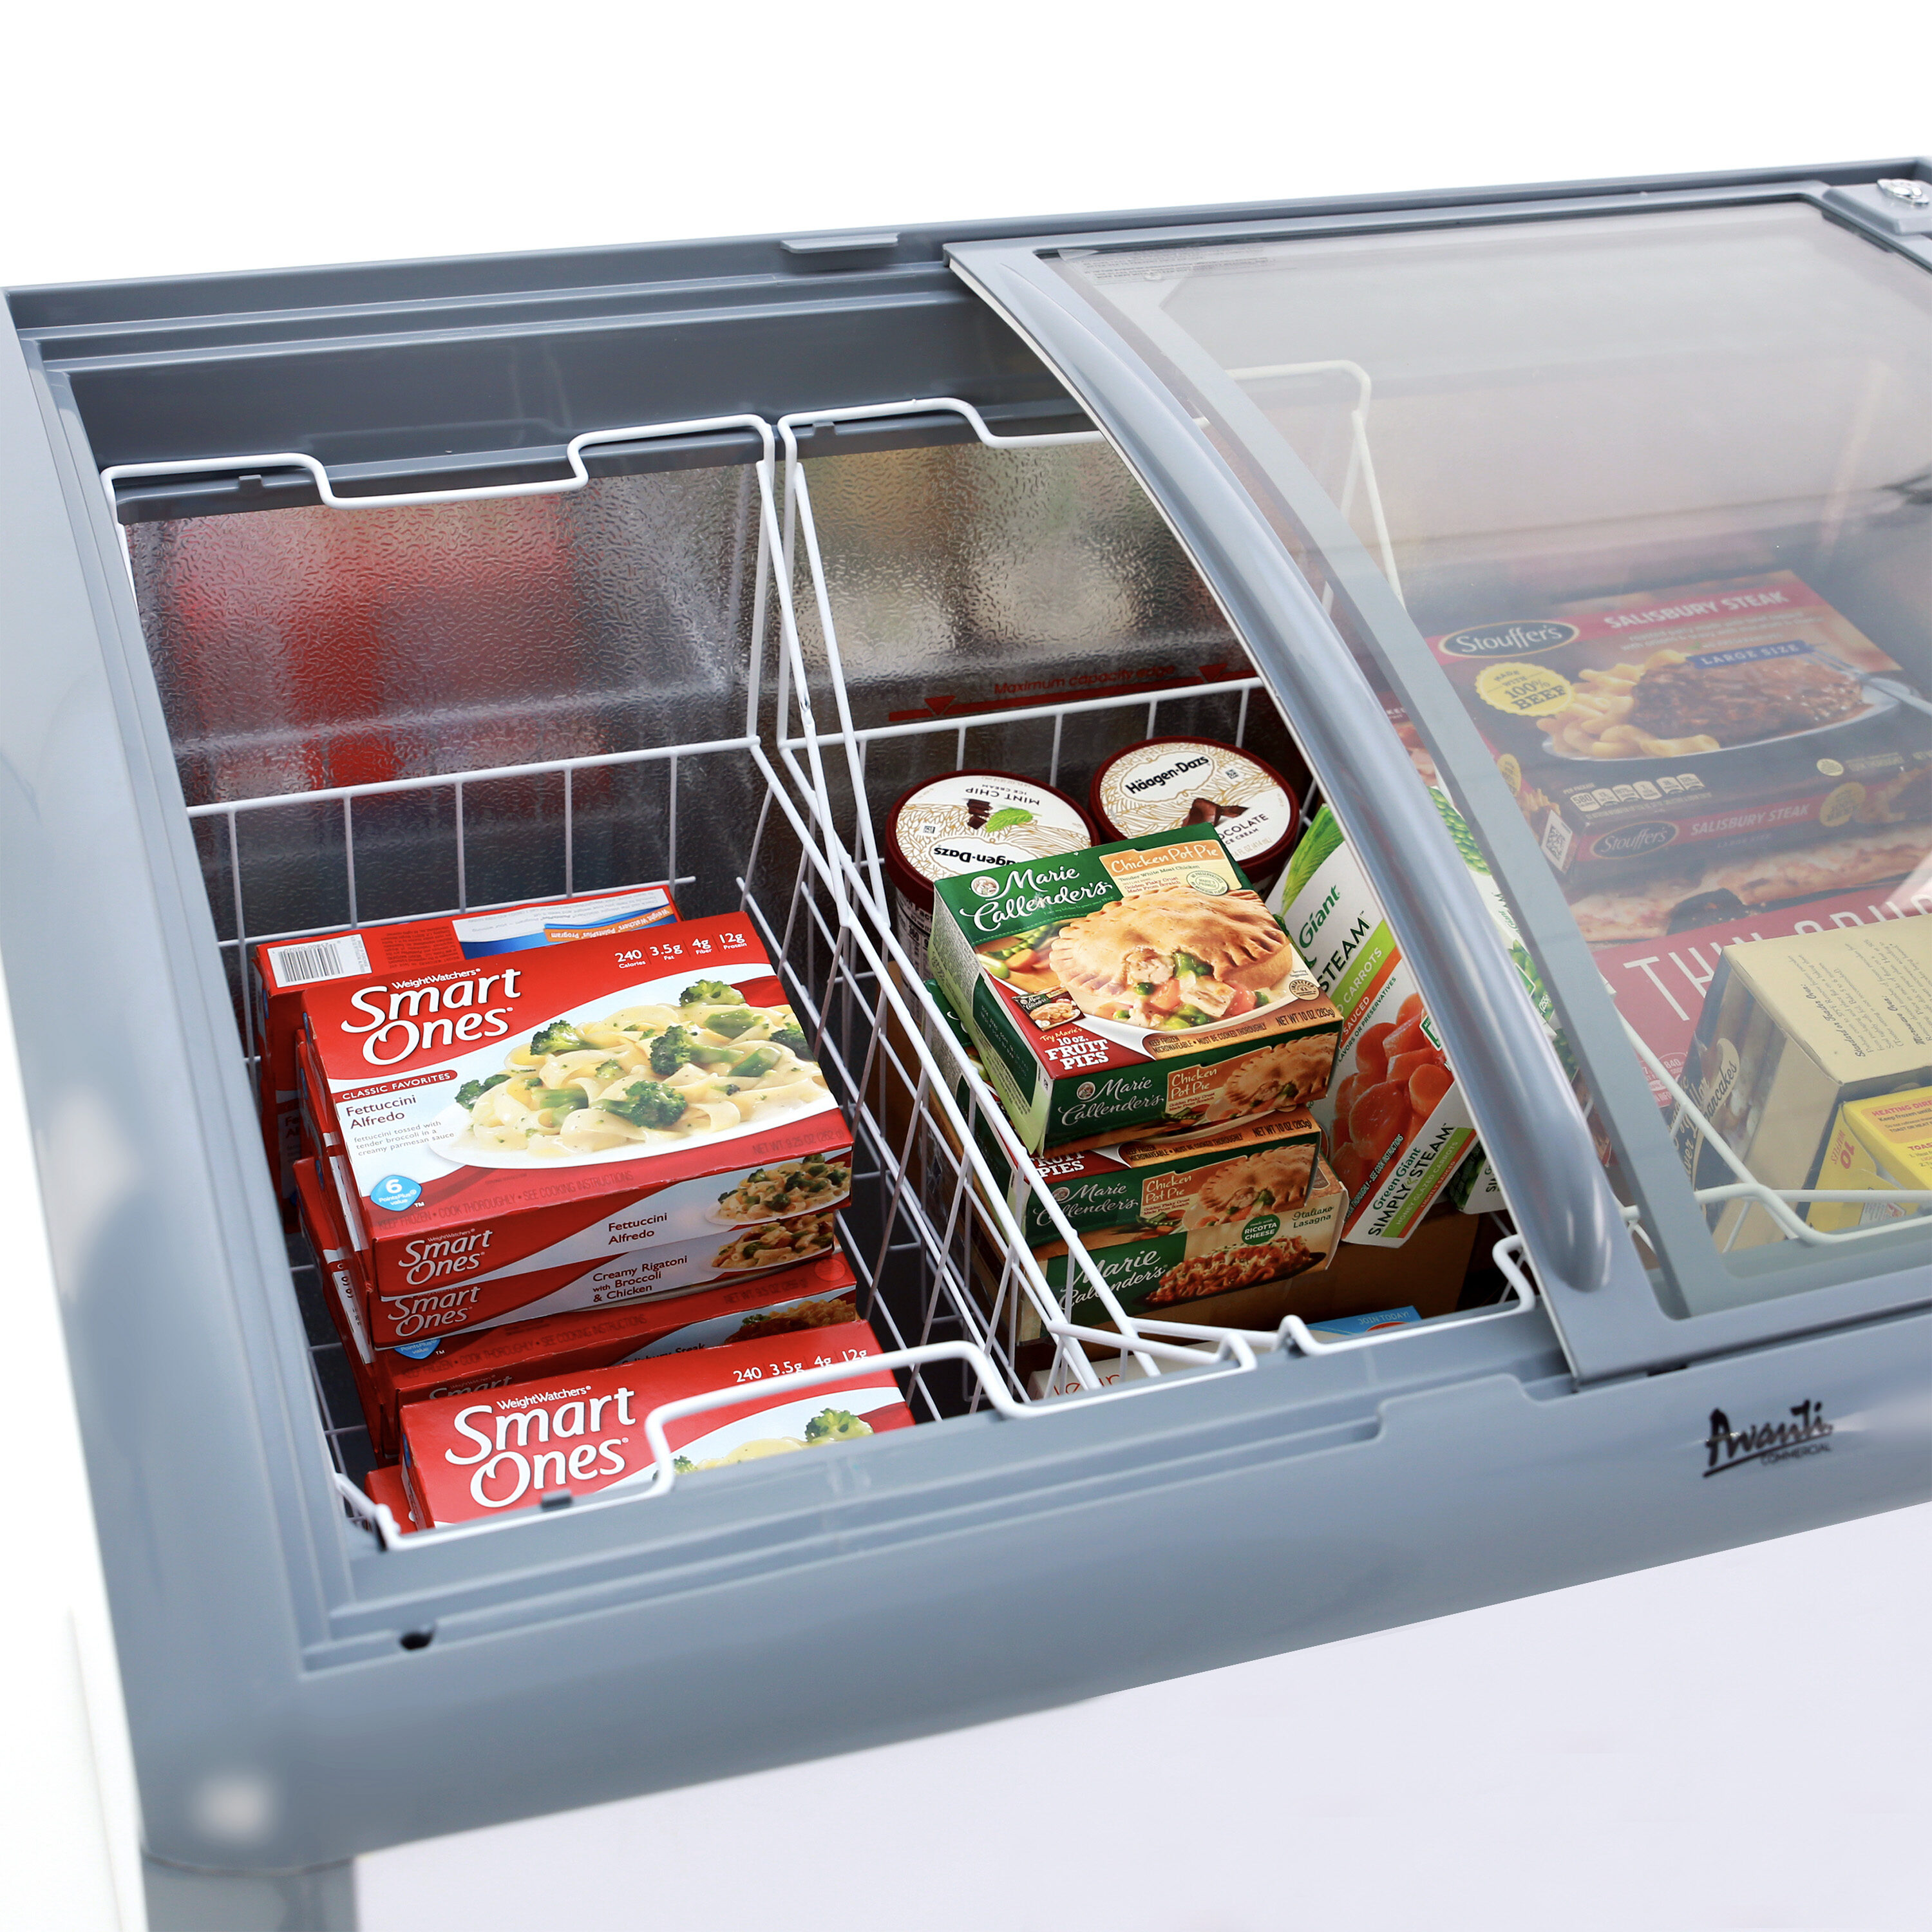 Avanti 9.5 cu. ft. Commercial Glass Top Freezer or Refrigerator, in White  (CFC836Q0WG)